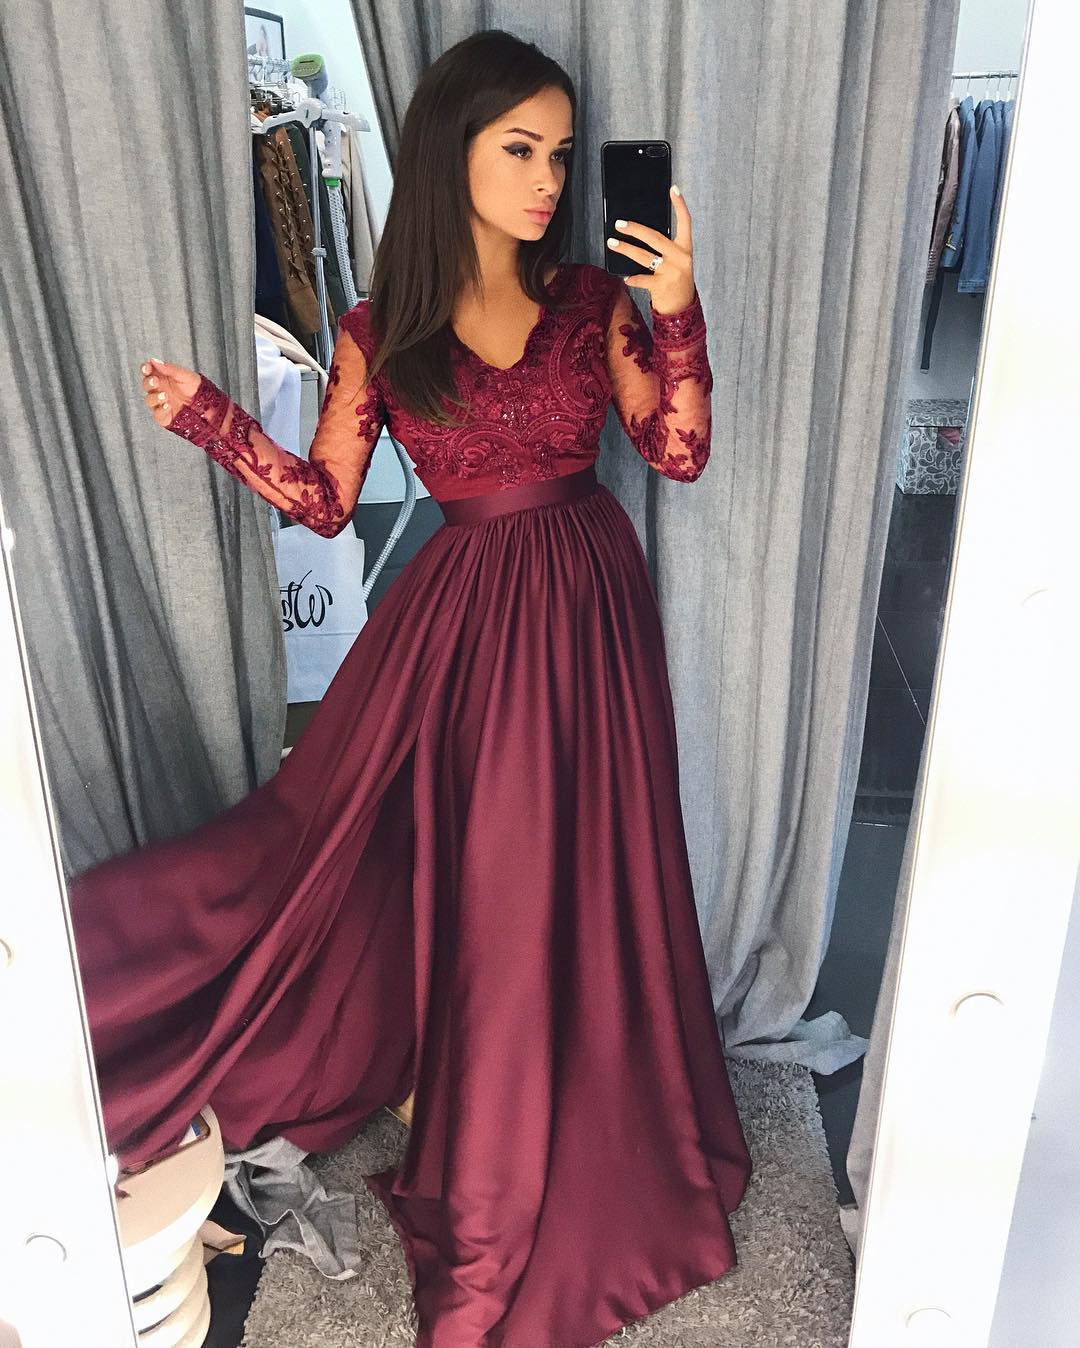 Dress for the graduation prom dresses with sleeves prom dress evening dresses, formal dresses  graduation party dresses WHRWIPV